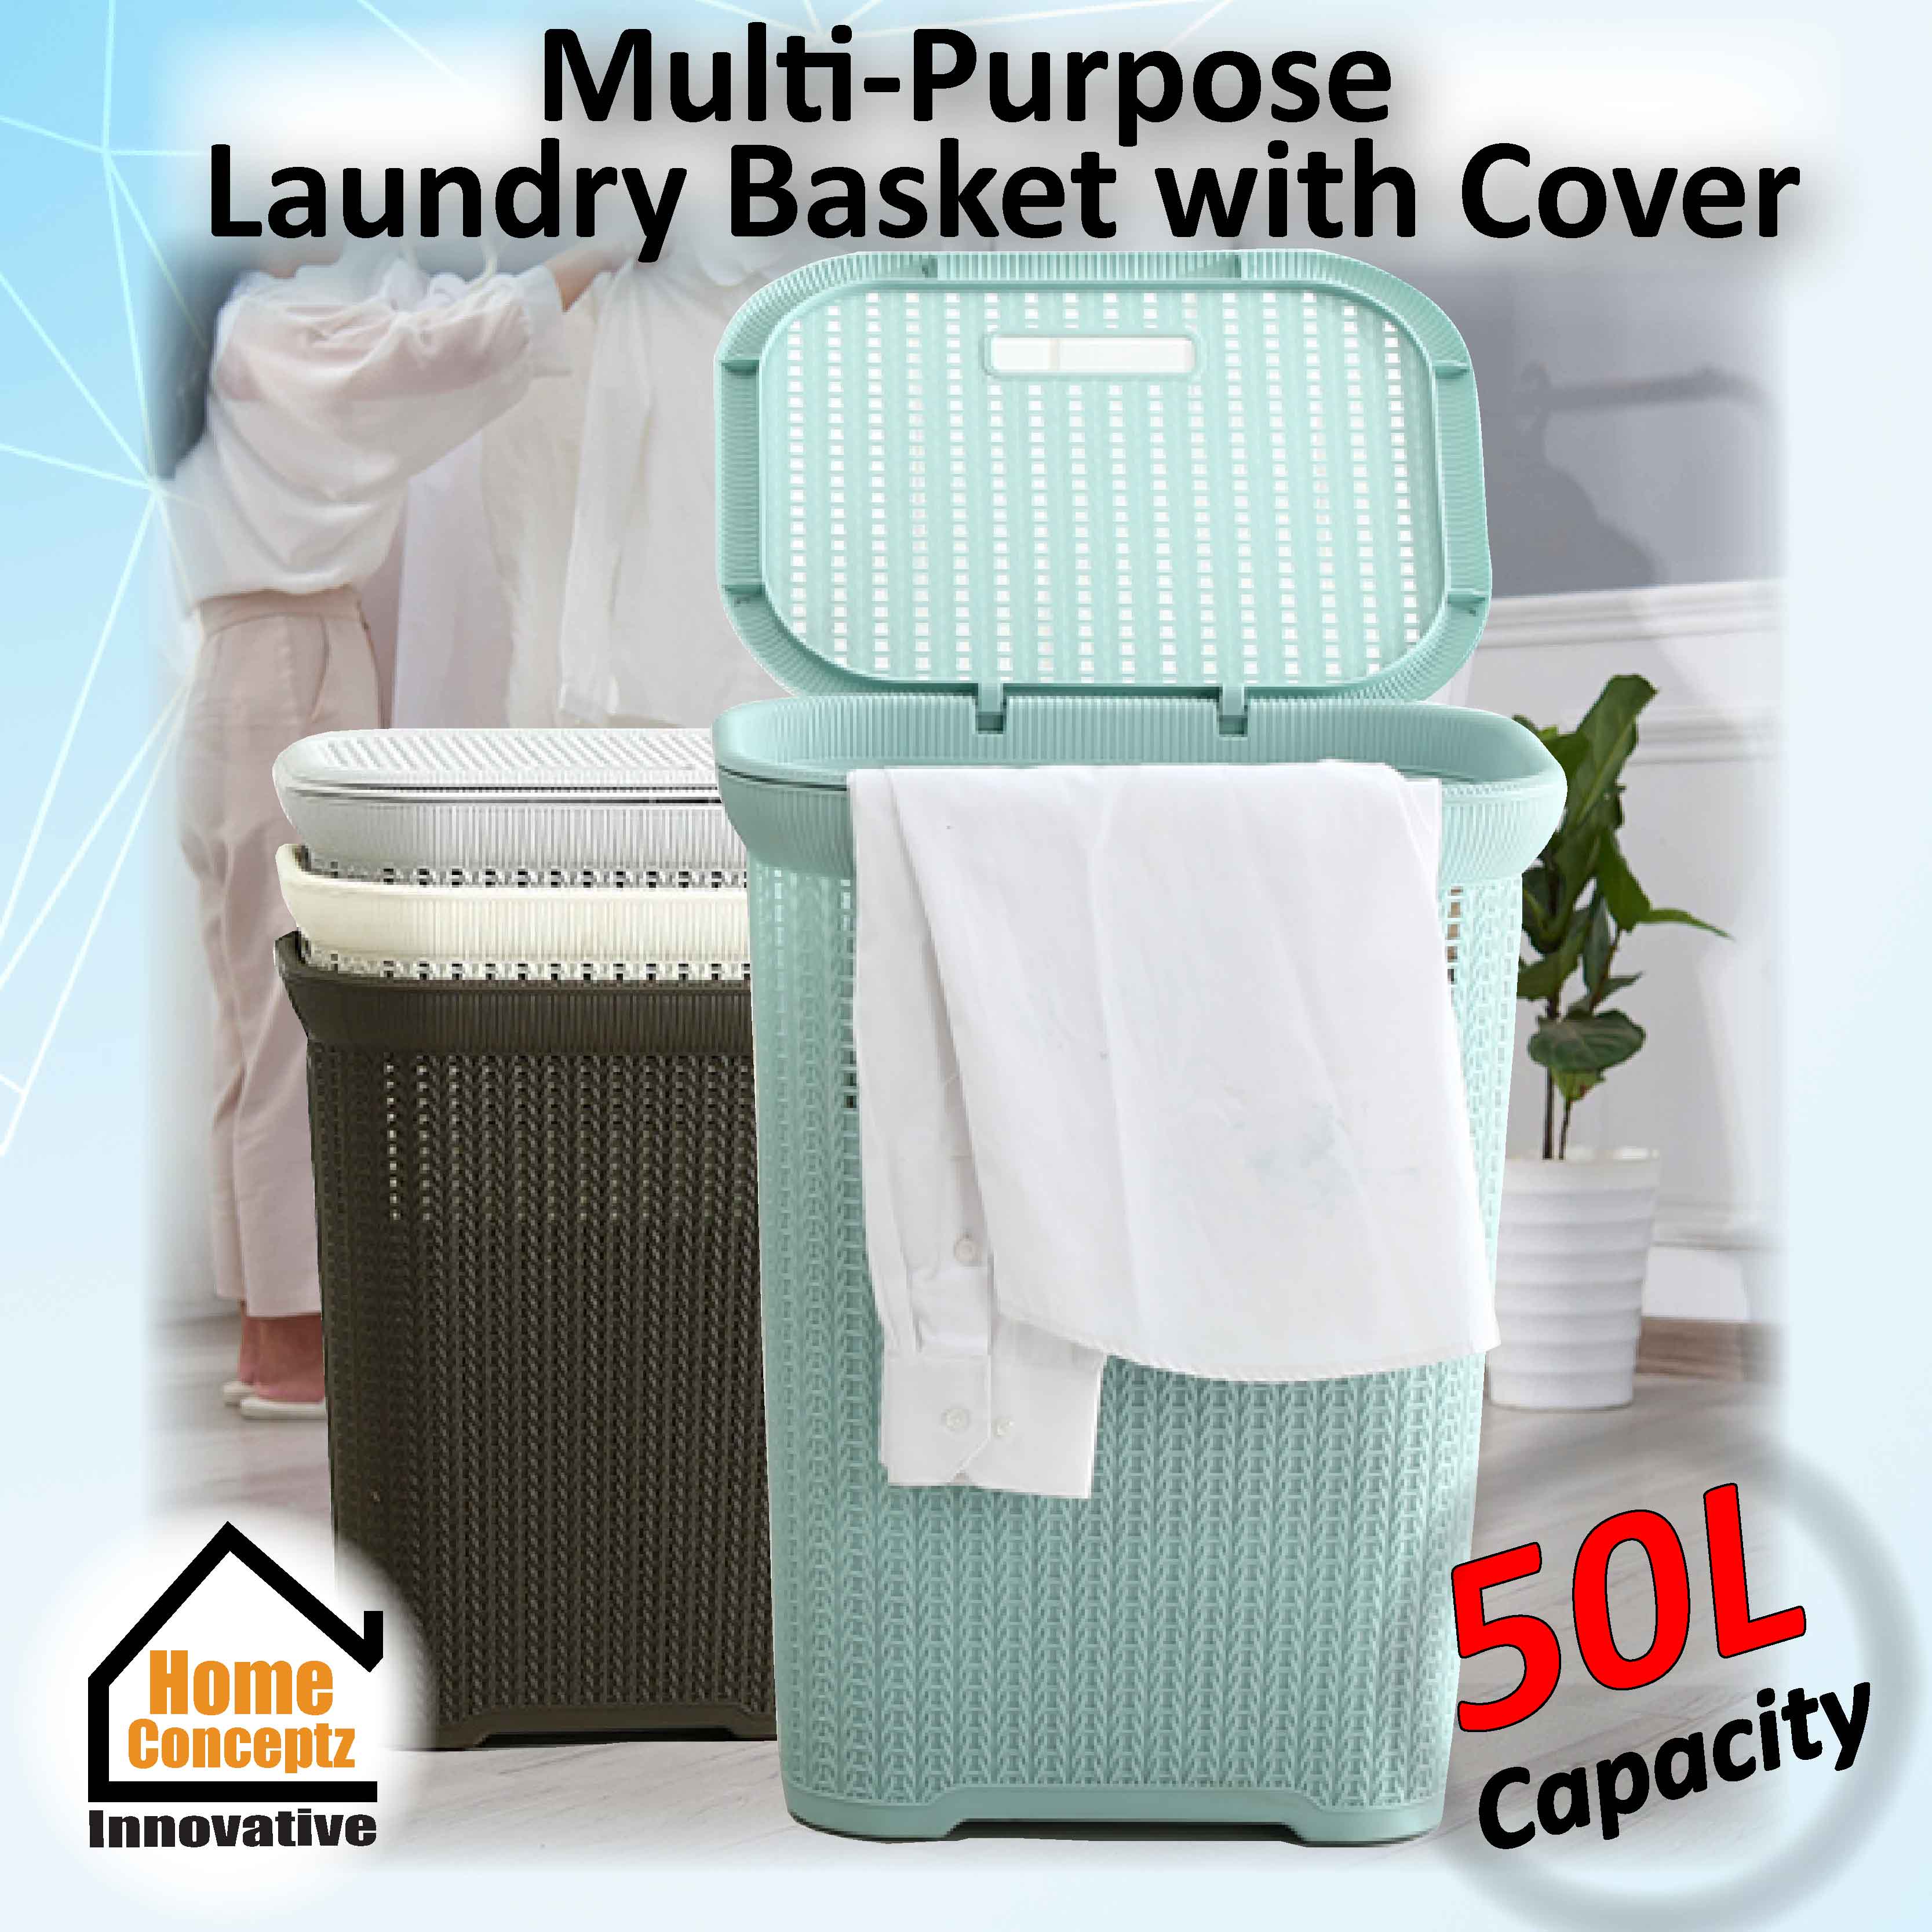 50l Multi Purpose Laundry Basket With Cover Storage Basket For Laundry Room Living Room Corridor Etc Big Capacity With Lid Lazada Singapore